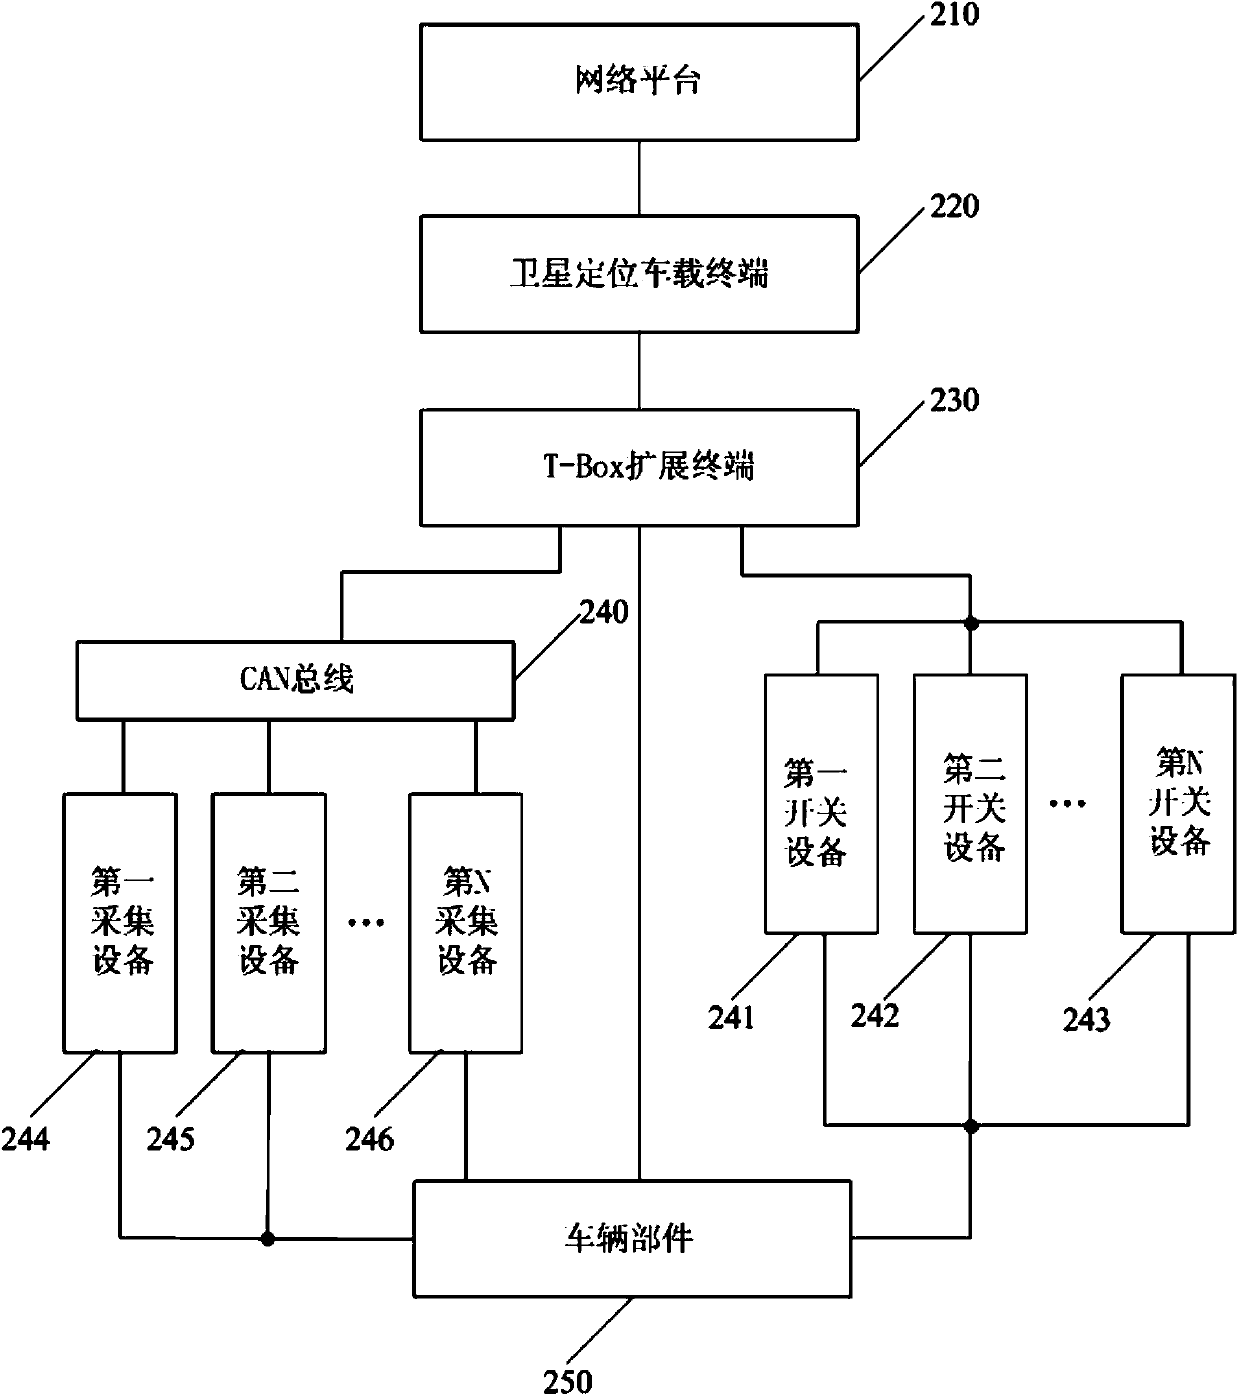 Method and device for monitoring vehicle state and driving behavior